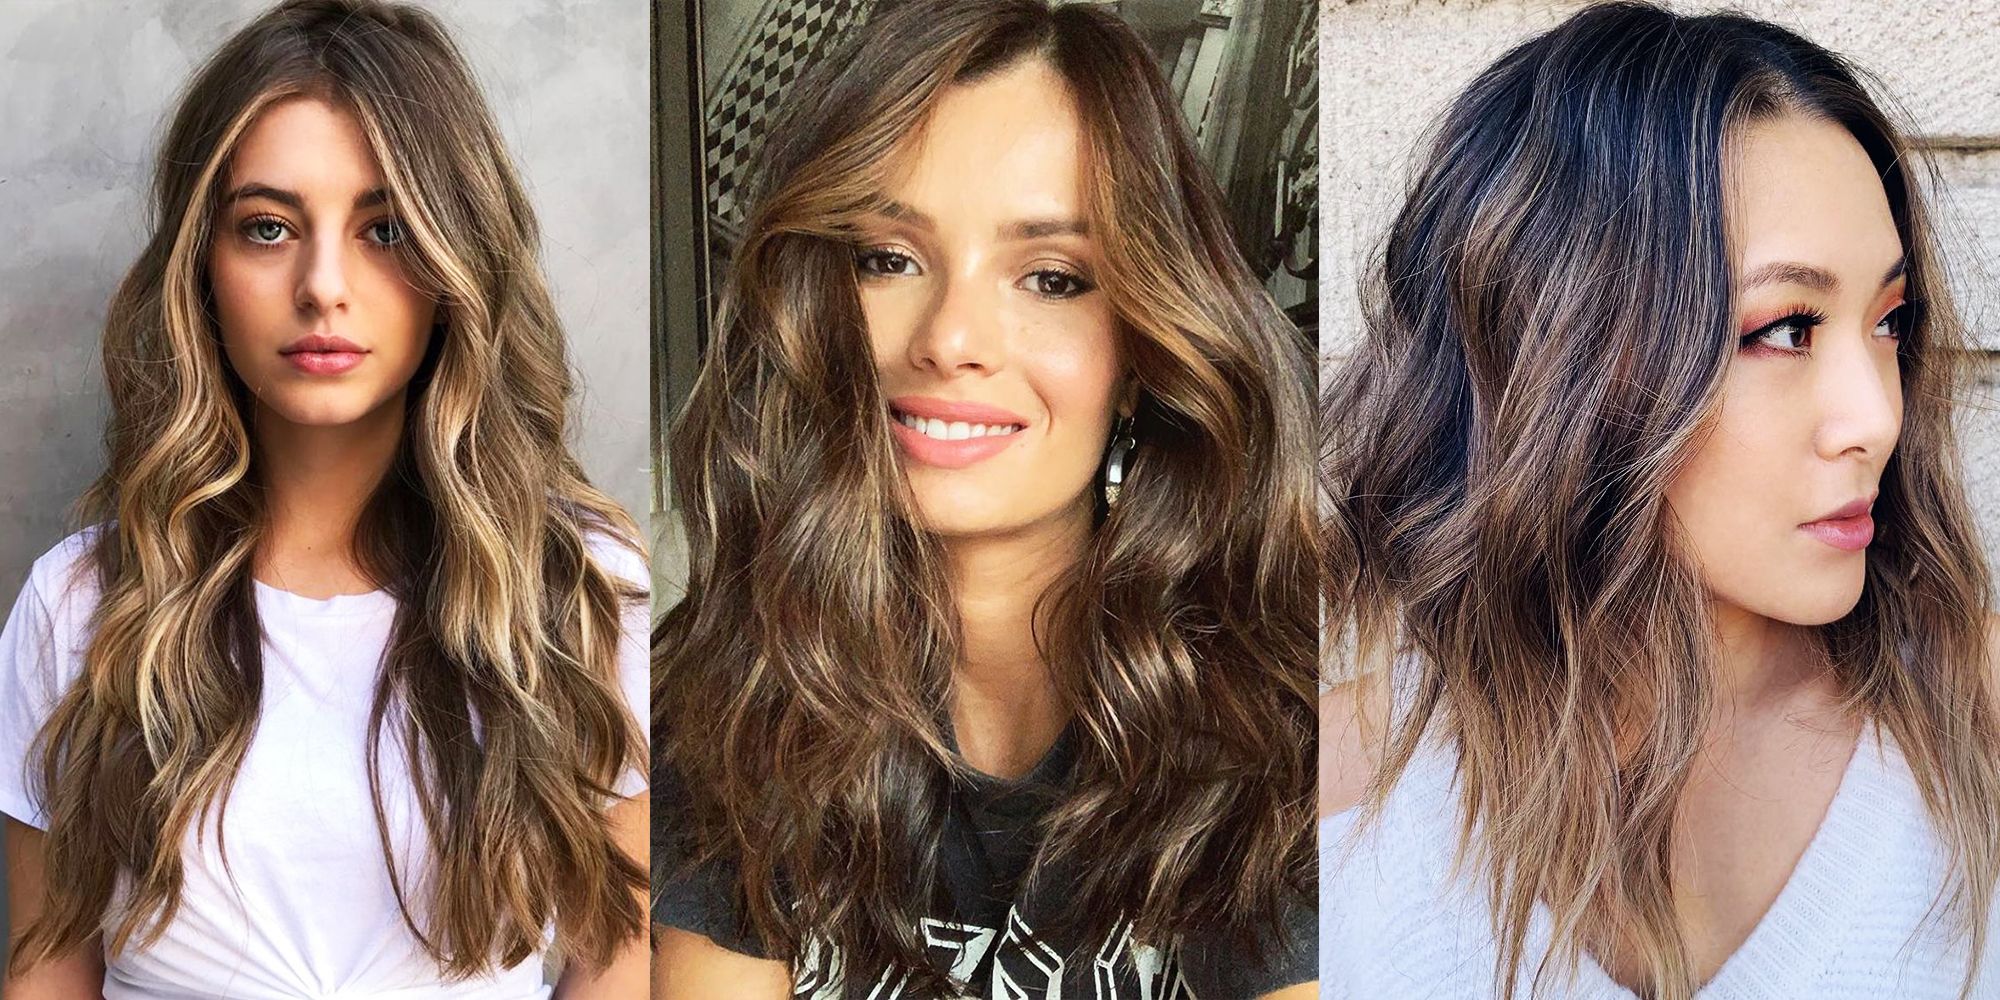 20 Best Brown Hair With Highlights Ideas for 2019 – Summer Hair Color Inspo